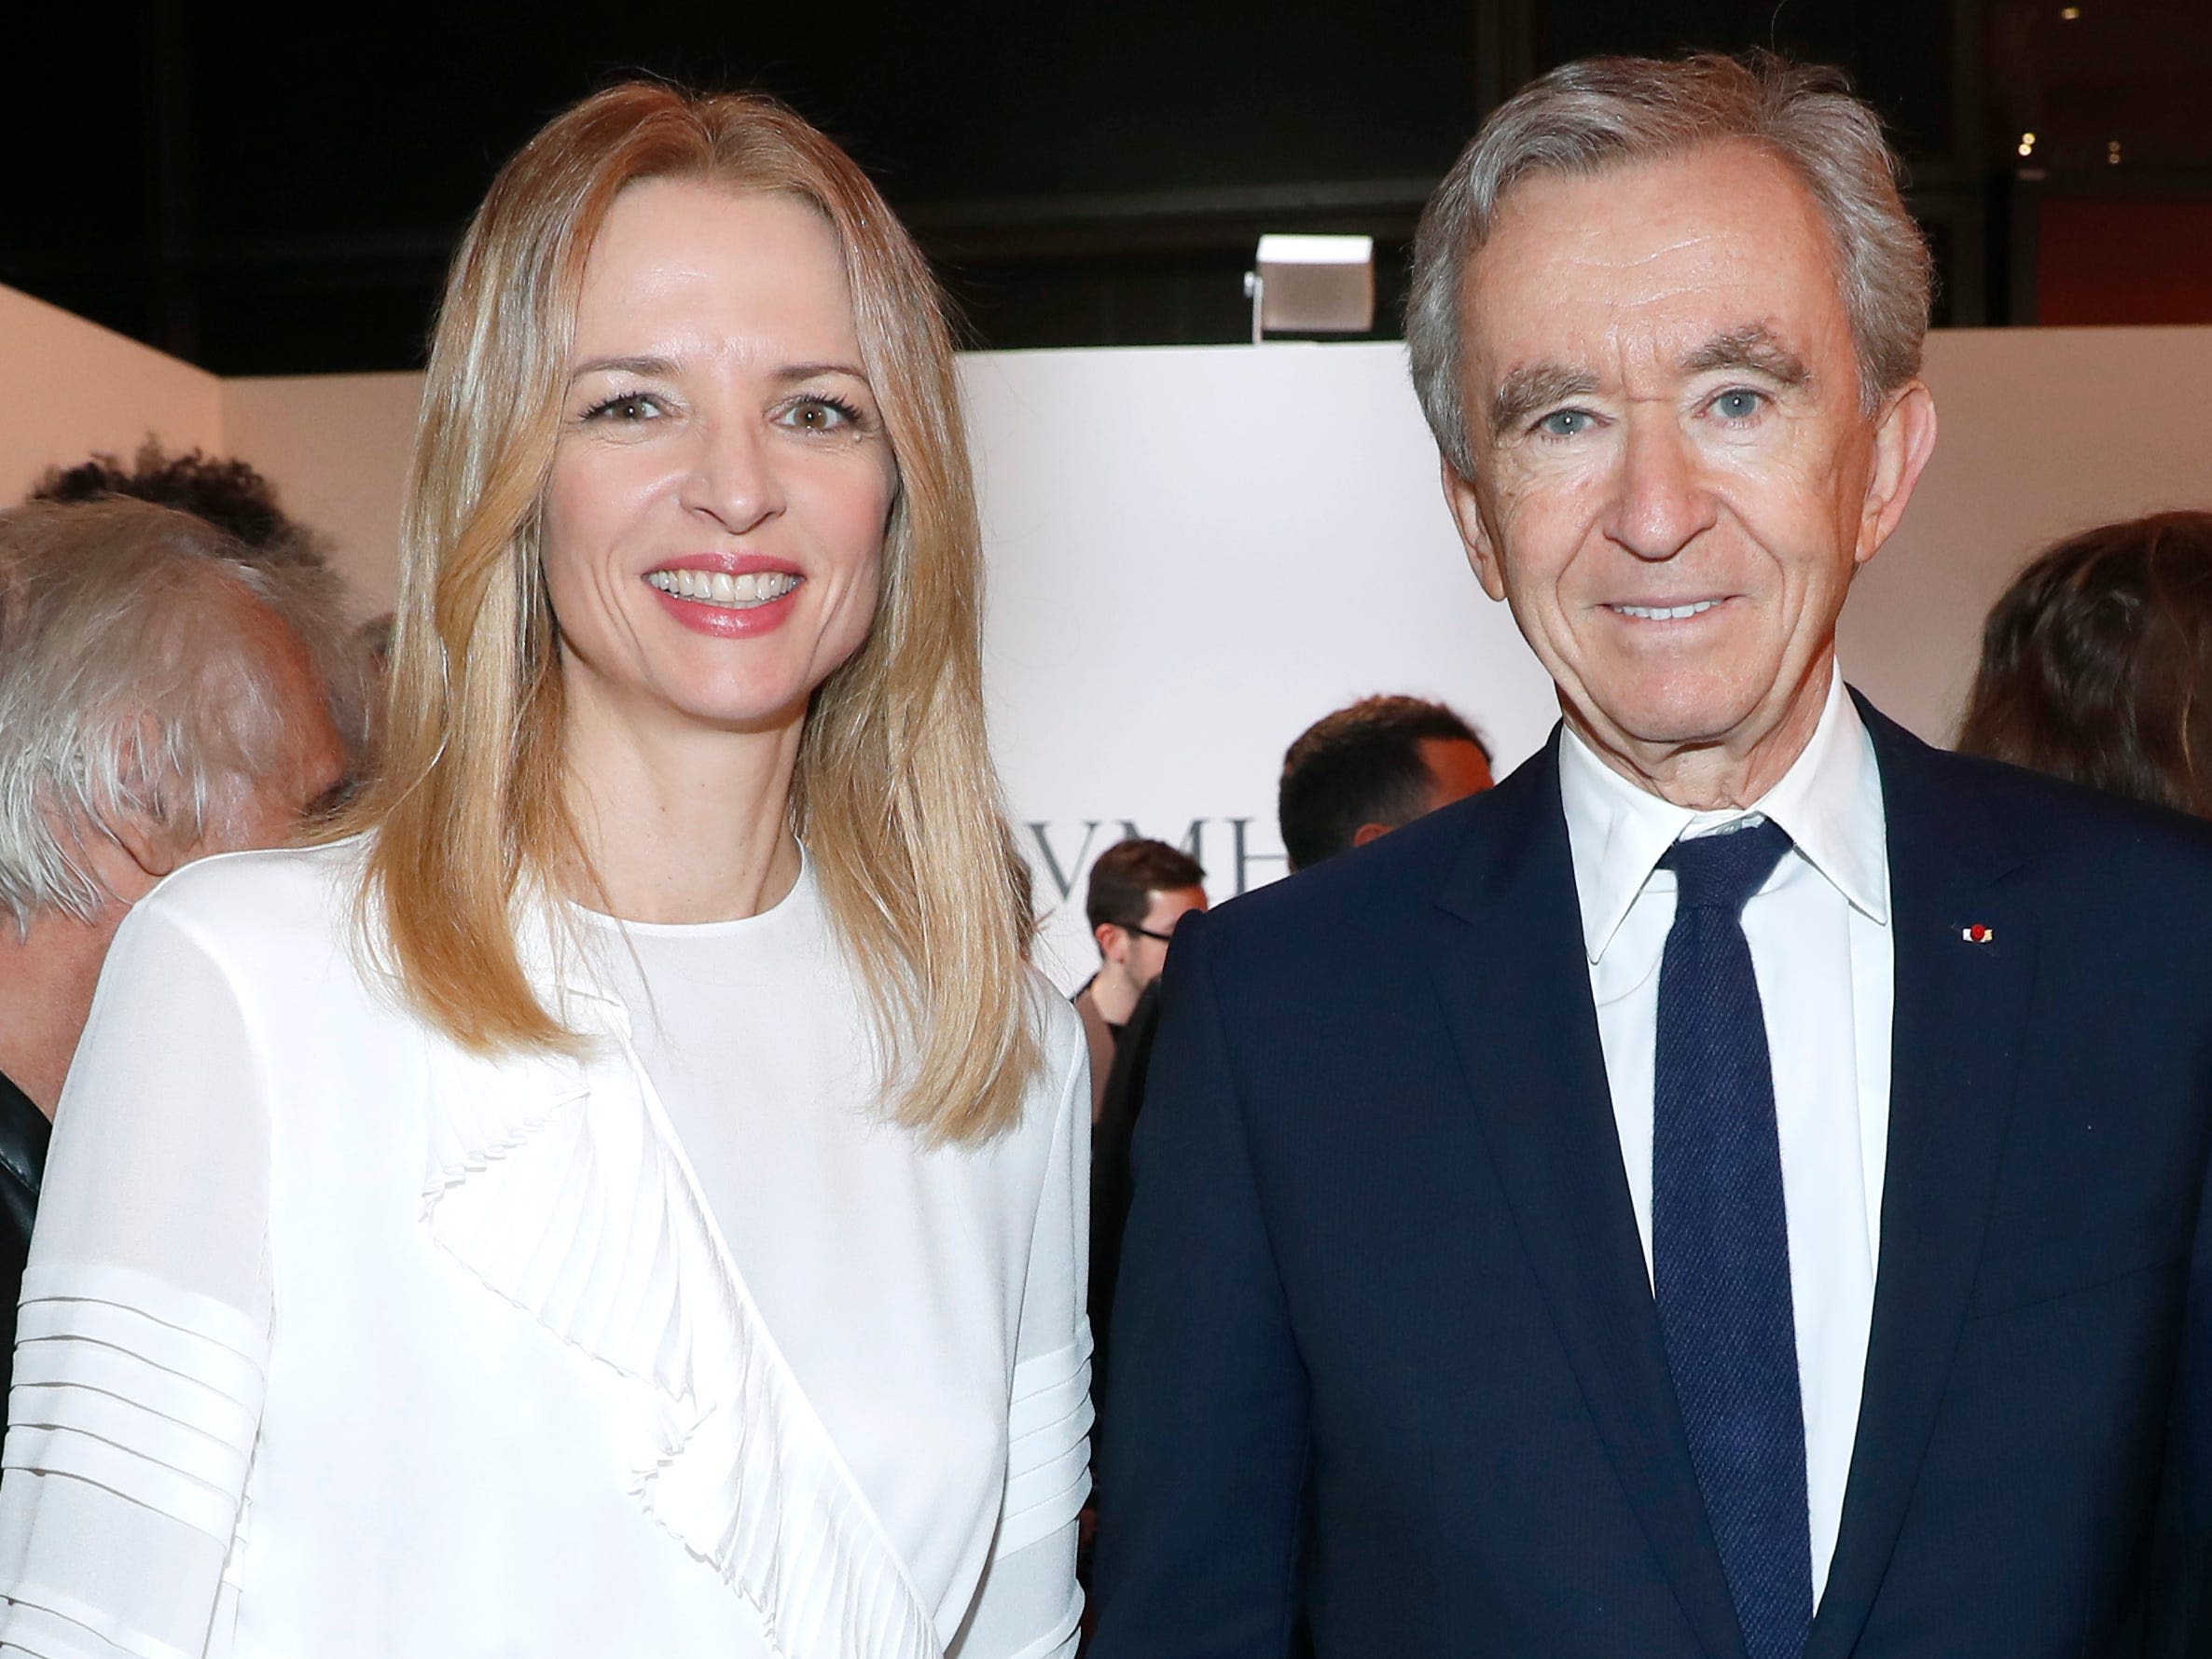 Luxury tycoon Bernard Arnault just put 1 of his sons in charge of an LVMH holding company